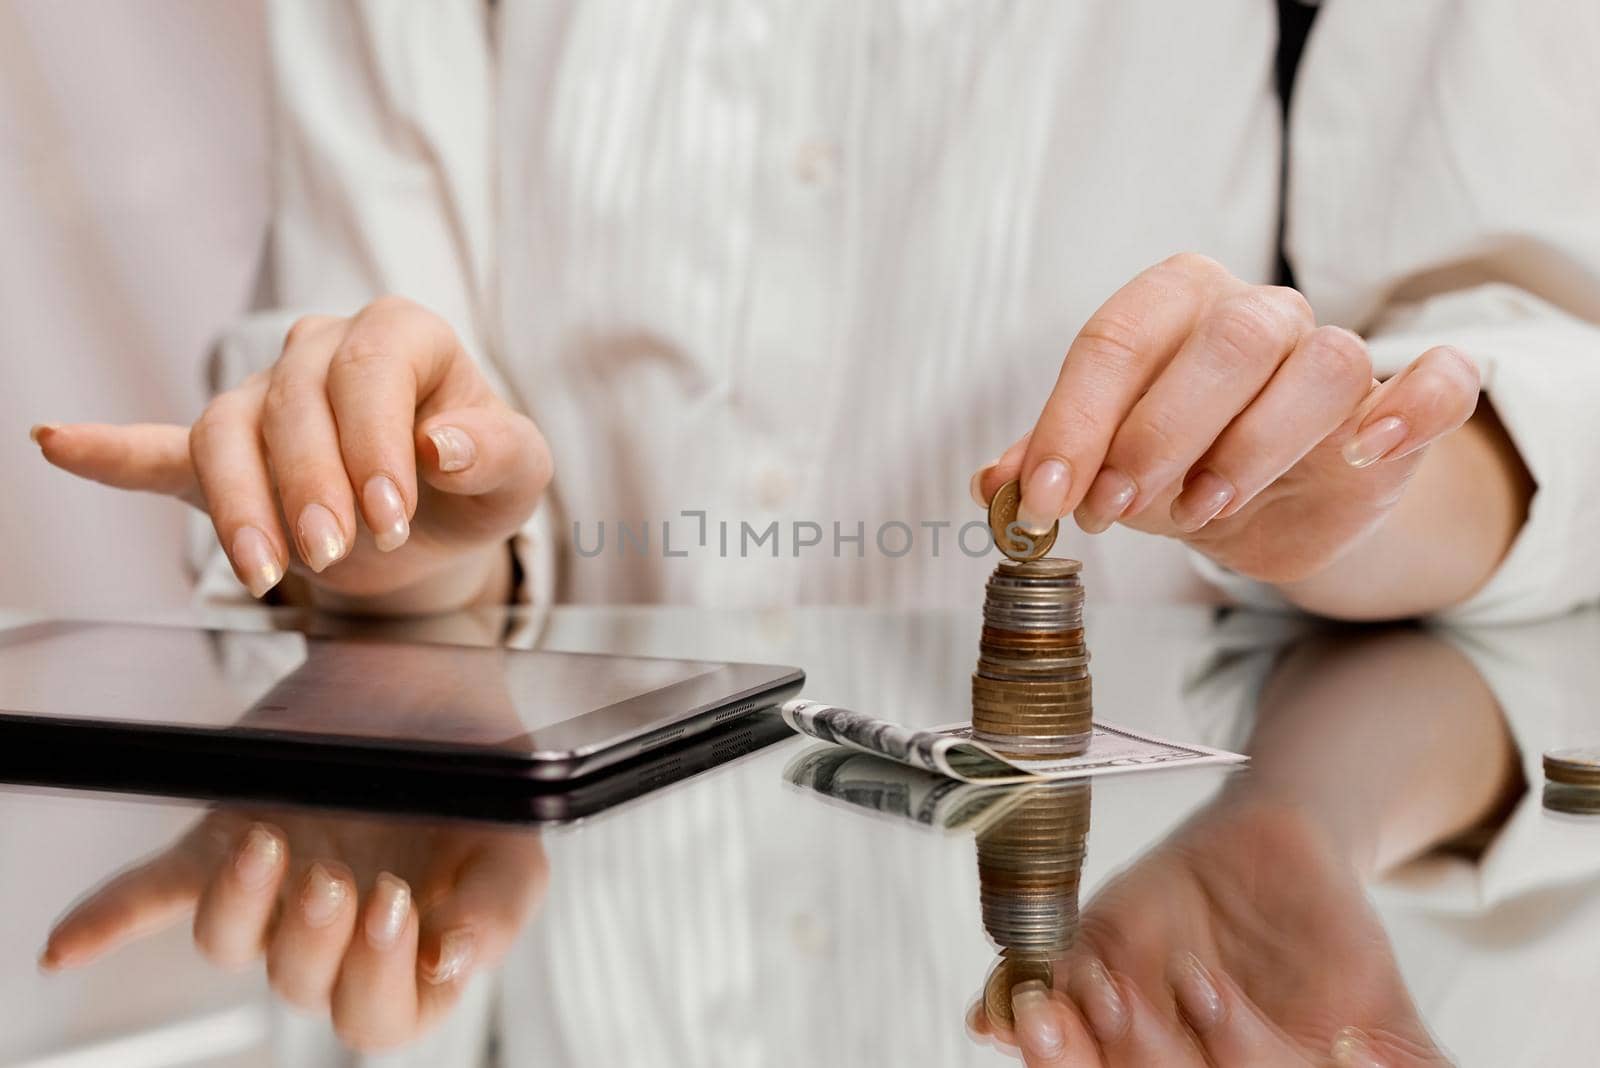 A woman counts finances on a tablet holding a coin from a stack on a banknote by AntonIlchanka